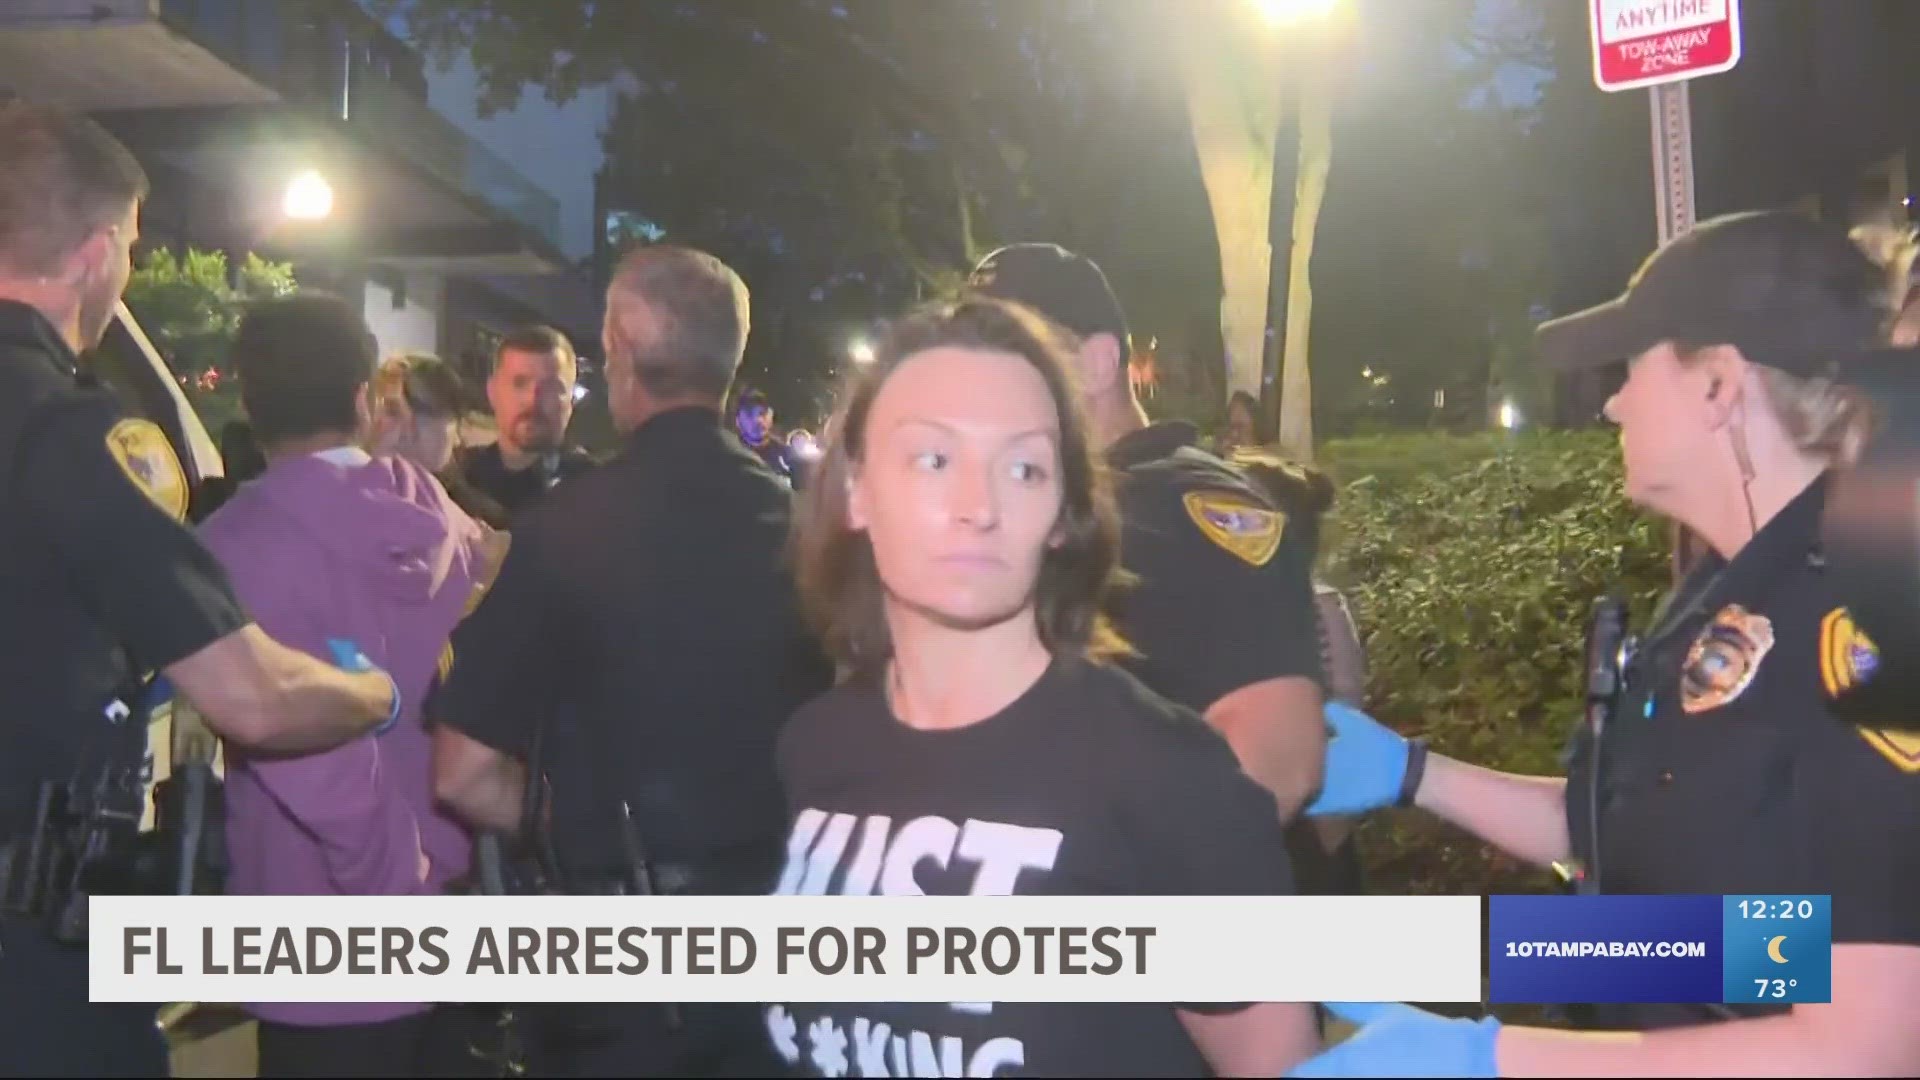 Fried, along with Florida Senate minority leader Lauren Book and nine other demonstrators, were arrested during the protest.